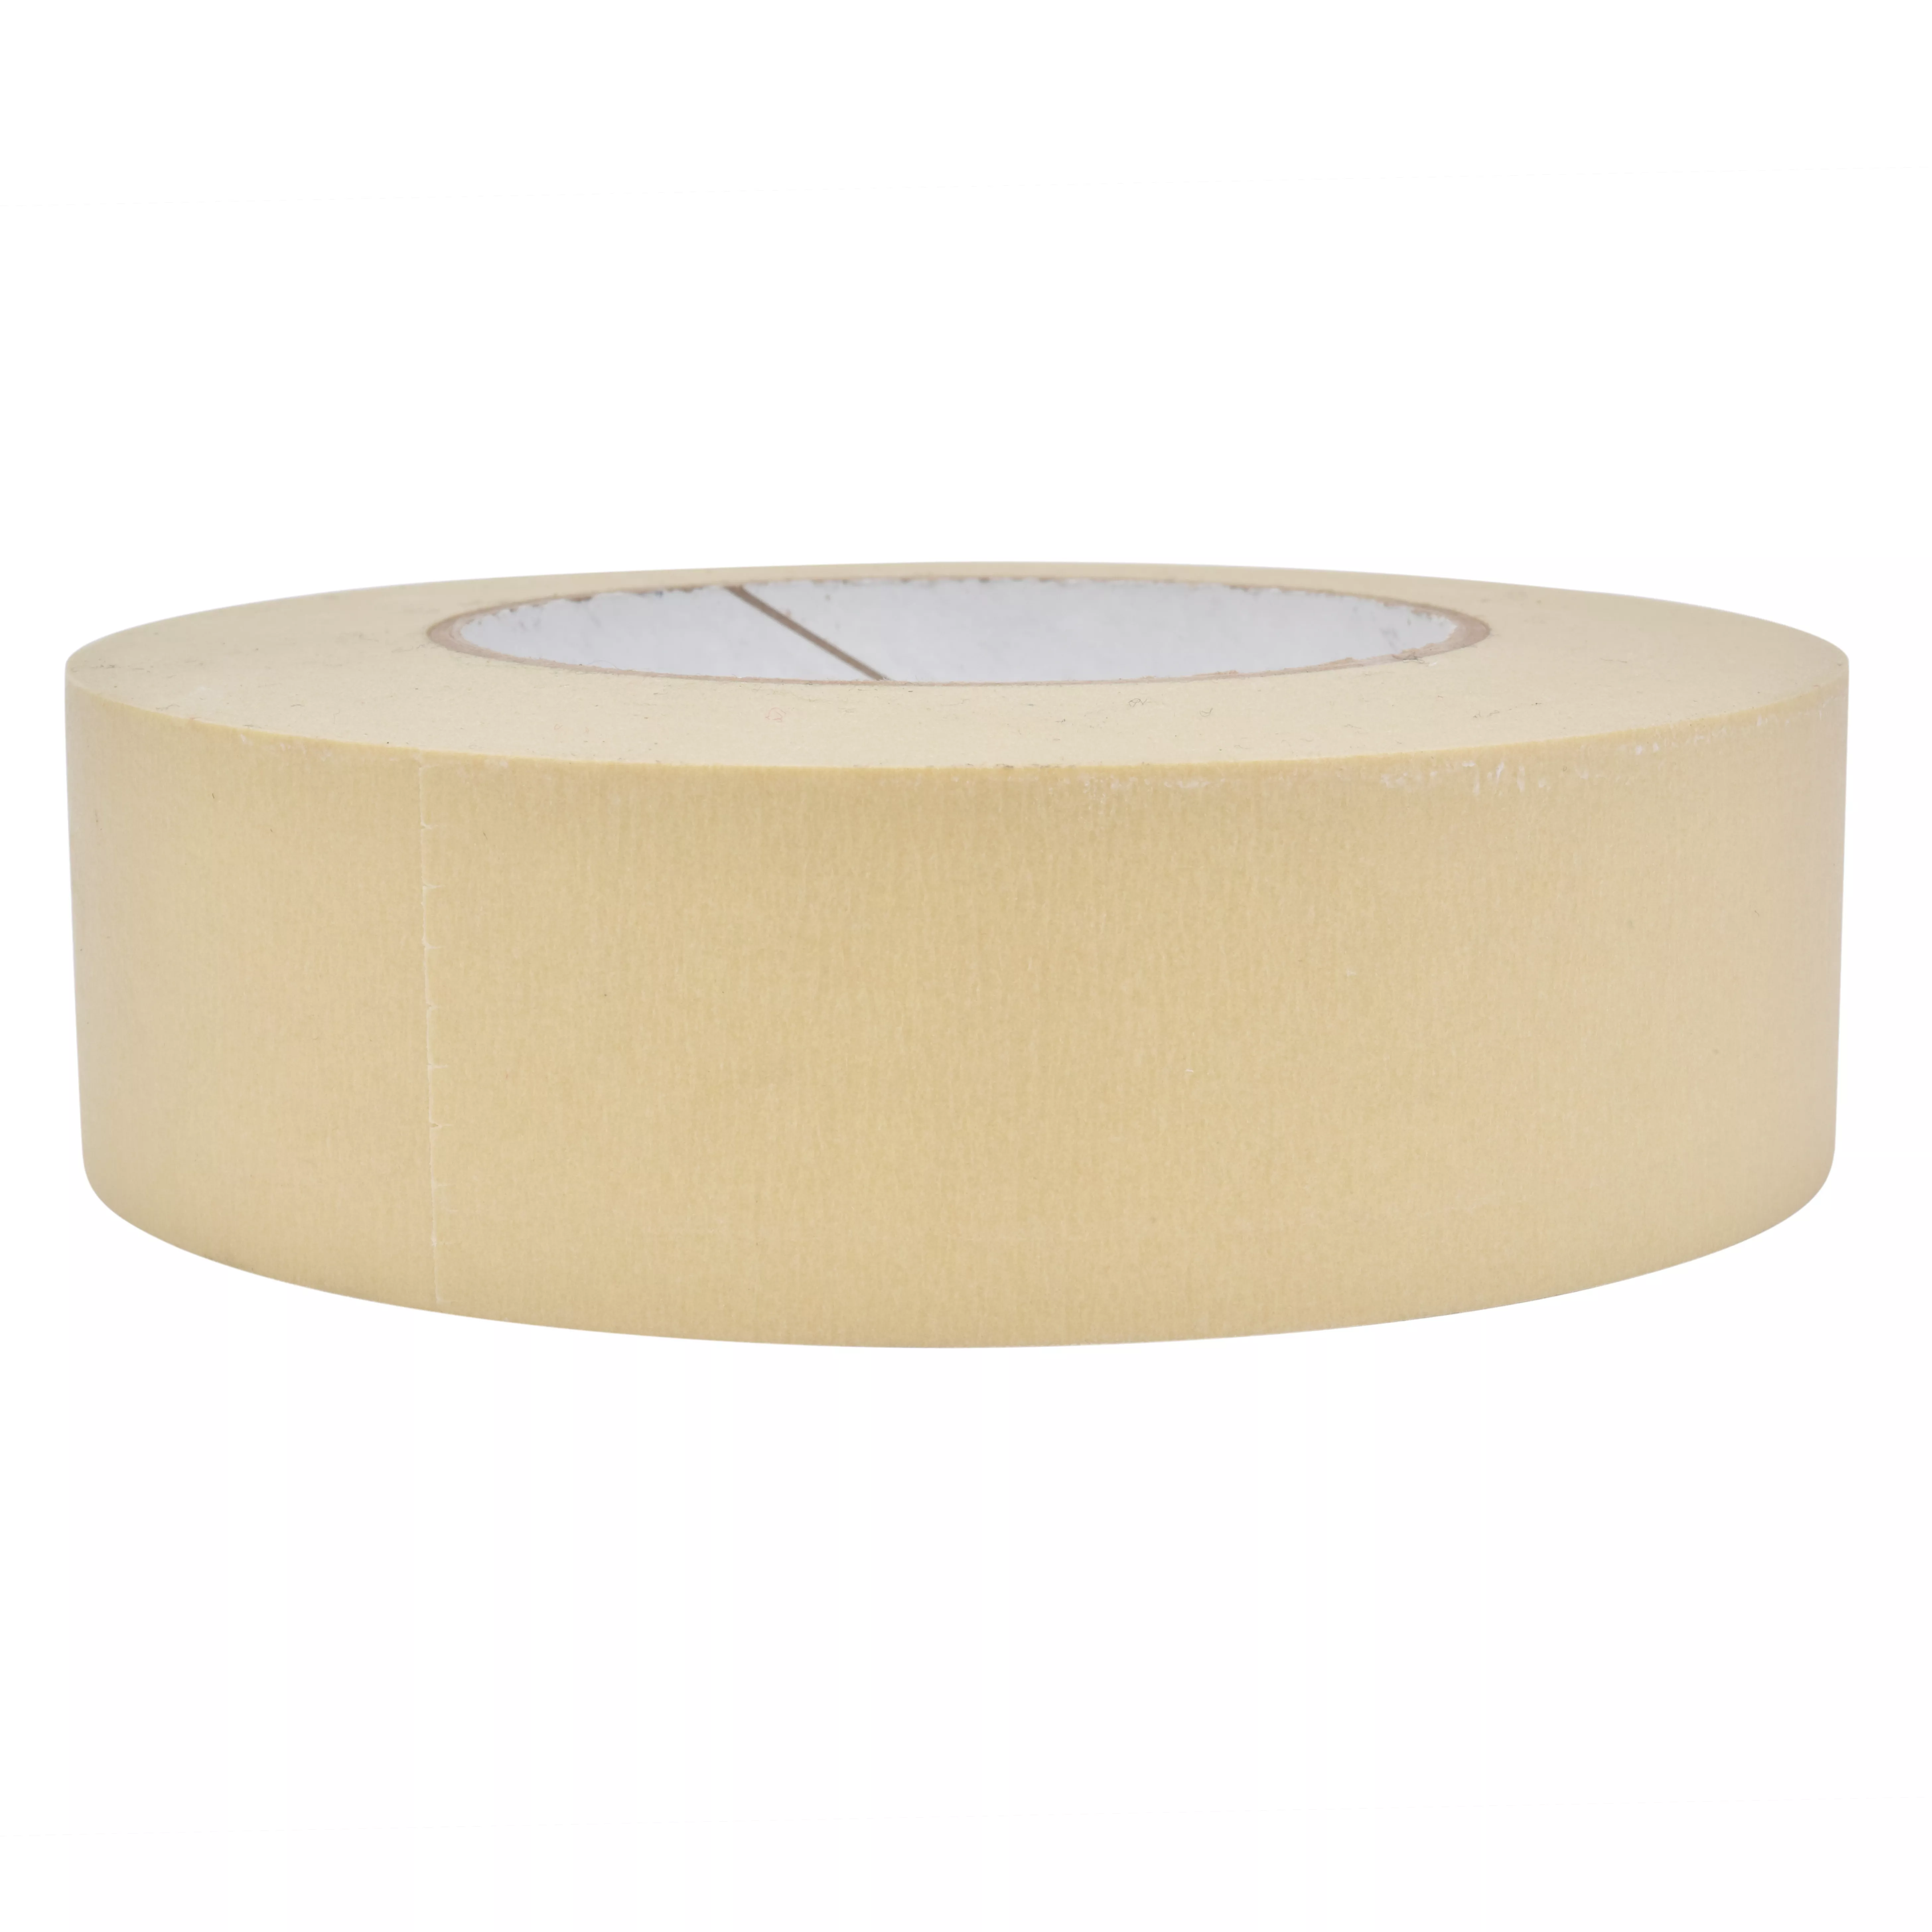 SKU 7010295793 | 3M™ Specialty High Temperature Masking Tape 5501A